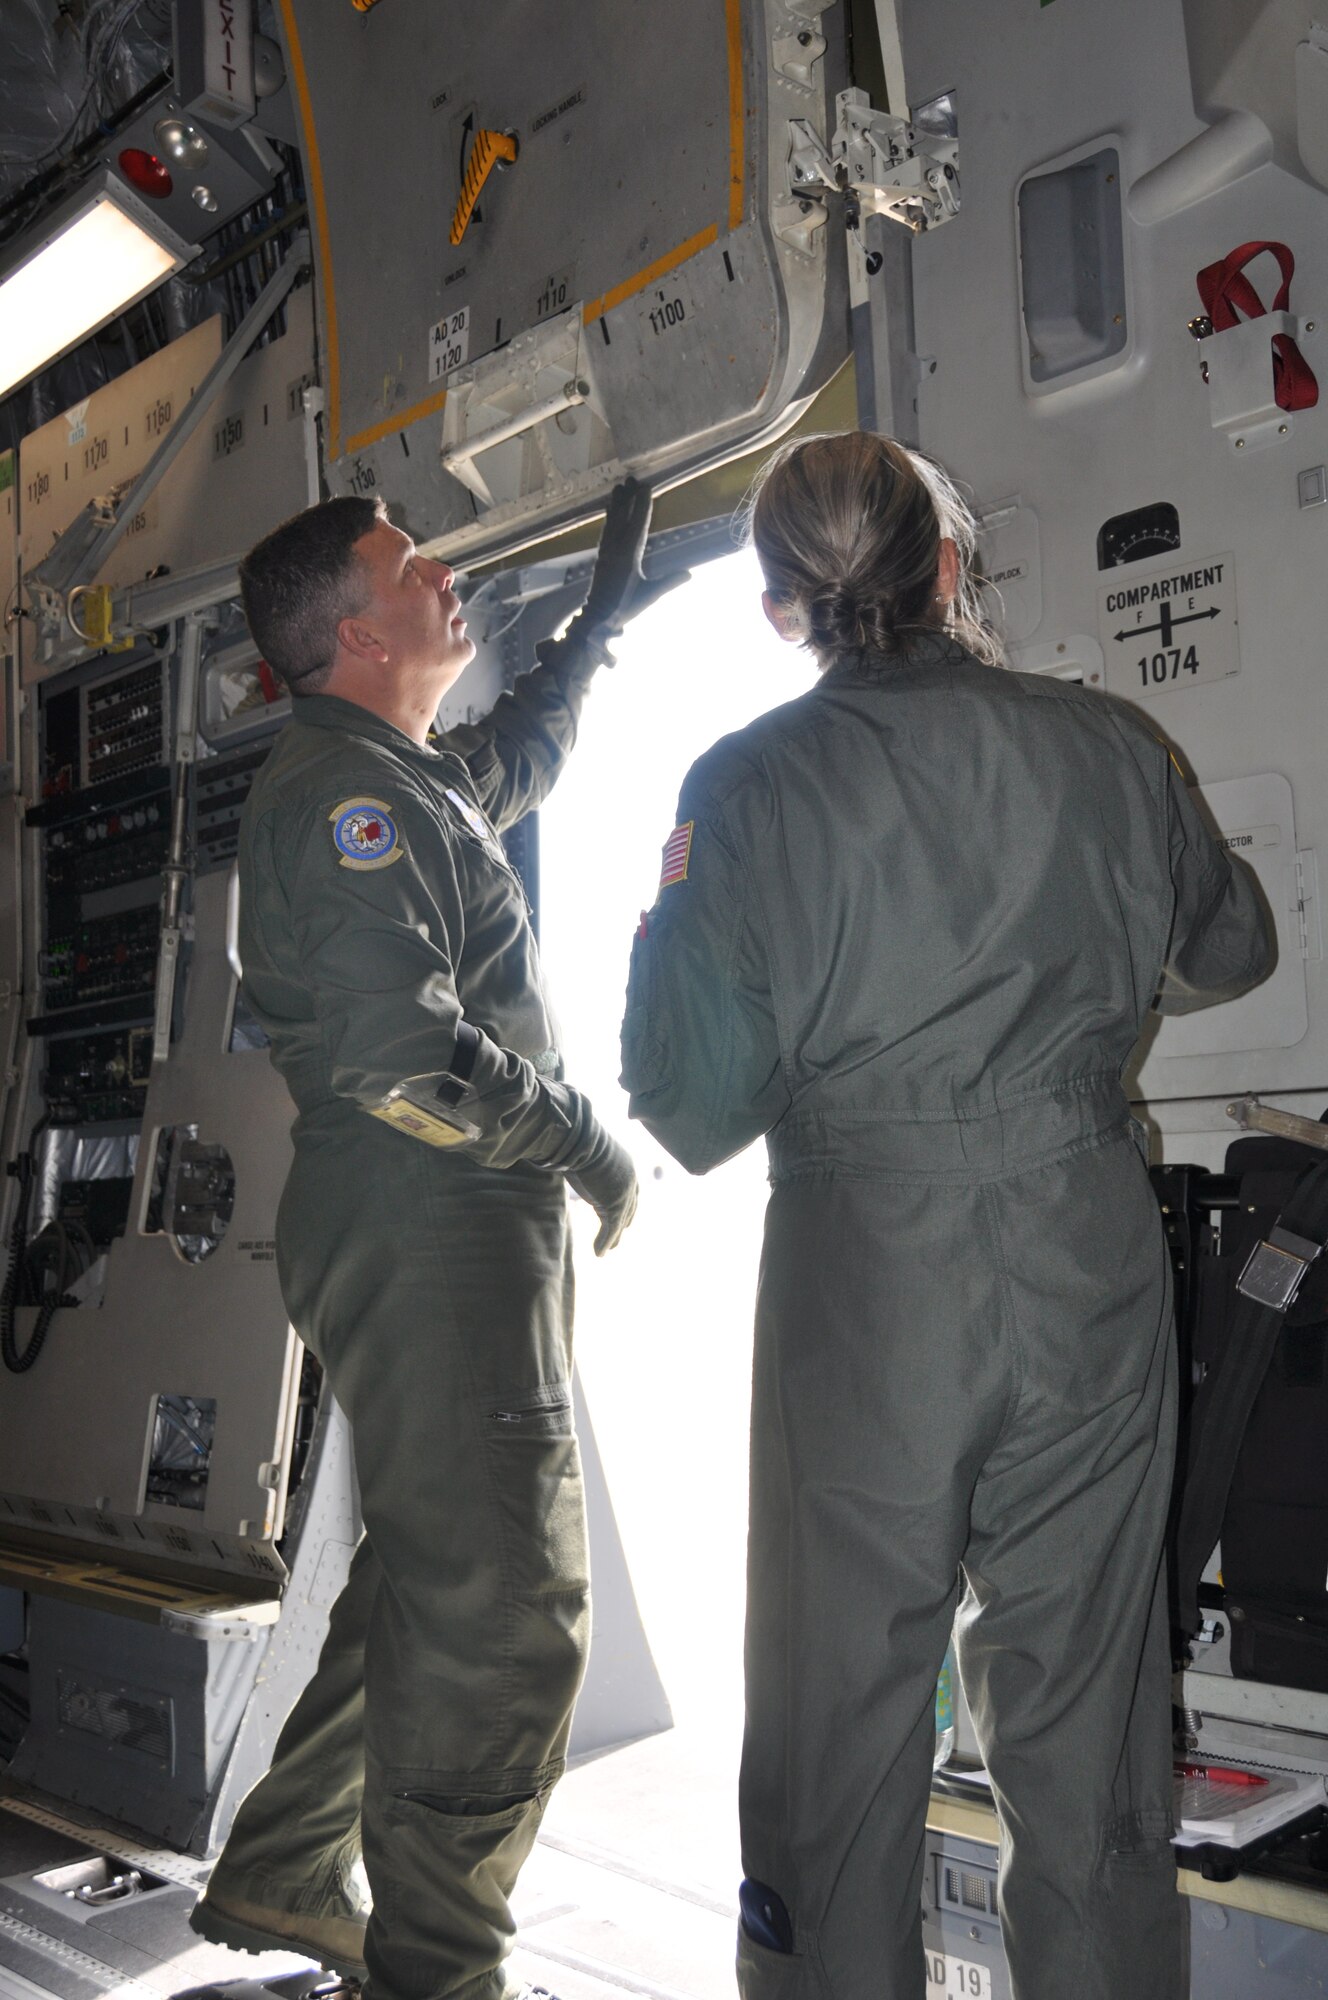 Senior Master Sgt. Michael Kent, 732nd Airlift Squadron loadmaster scheduler, conducts egress training with Lt. Col. Elizabeth Costanza, 514th Aeromedical Evacuation Squadron flight instructor student, by demonstrating emergency escape procedures on the door of a C-17 Globemaster III aircraft here April 5. Aircrew members undergo refresher egress courses every three years to satisfy training requirements (U.S. Air Force photo/Senior Airman Chelsea Smith).